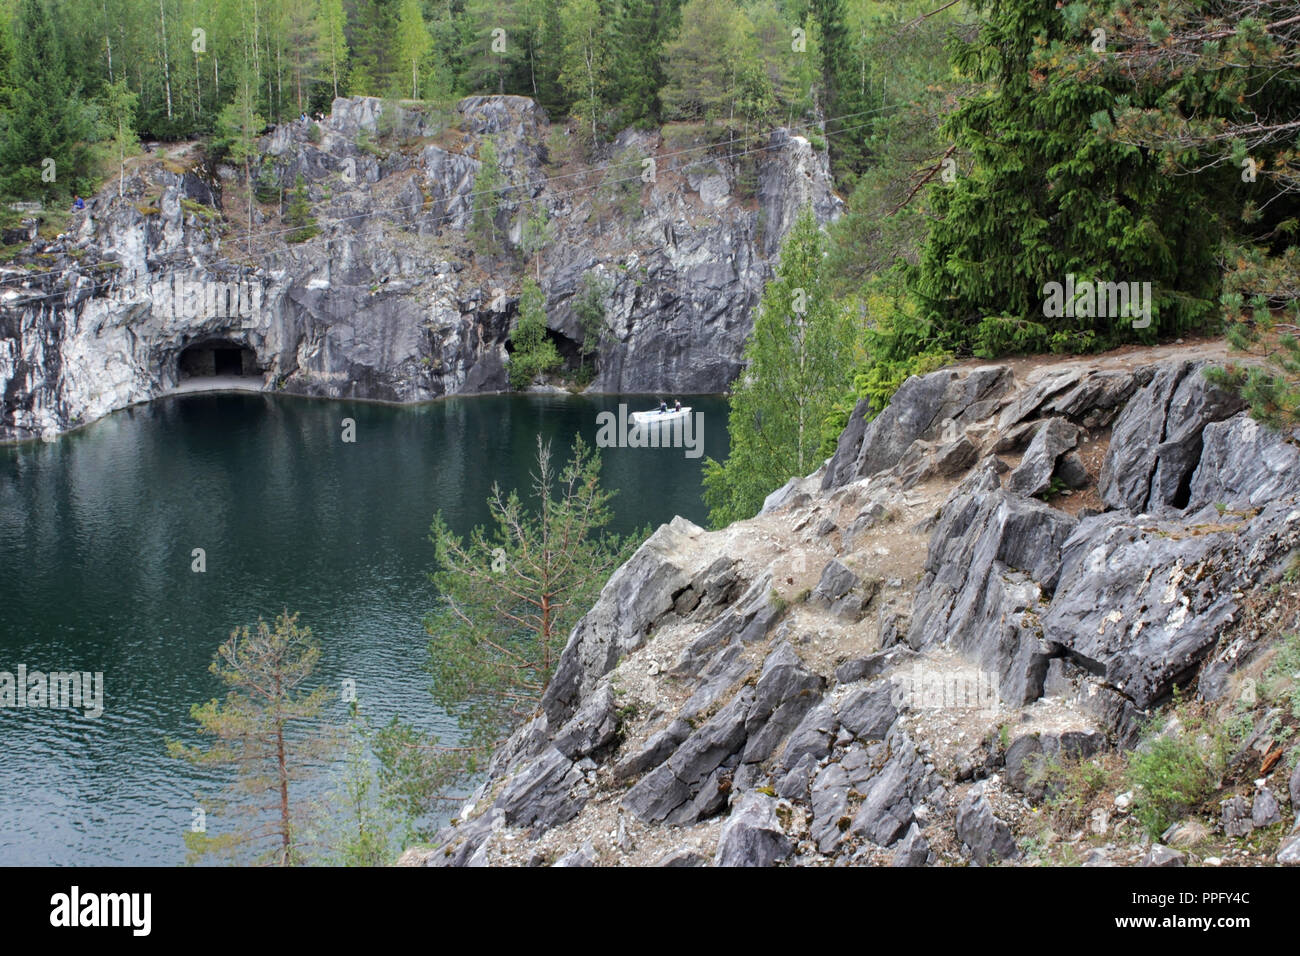 Ruskeala marble quarry, Karelia, Russia. turquoise water in the river and gray with white veins of the shore, forest. Stock Photo